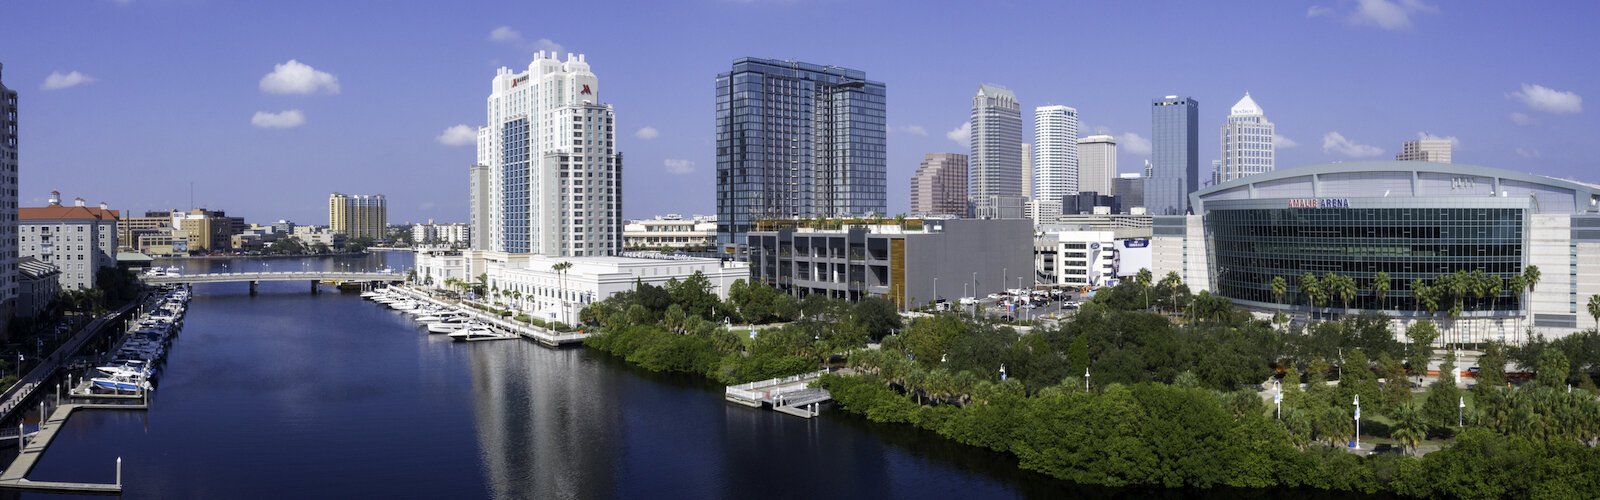 The new JW Marriott Hotel stands out between the Marriott Waterside and Amalie Arena in the Water Street Tampa development.